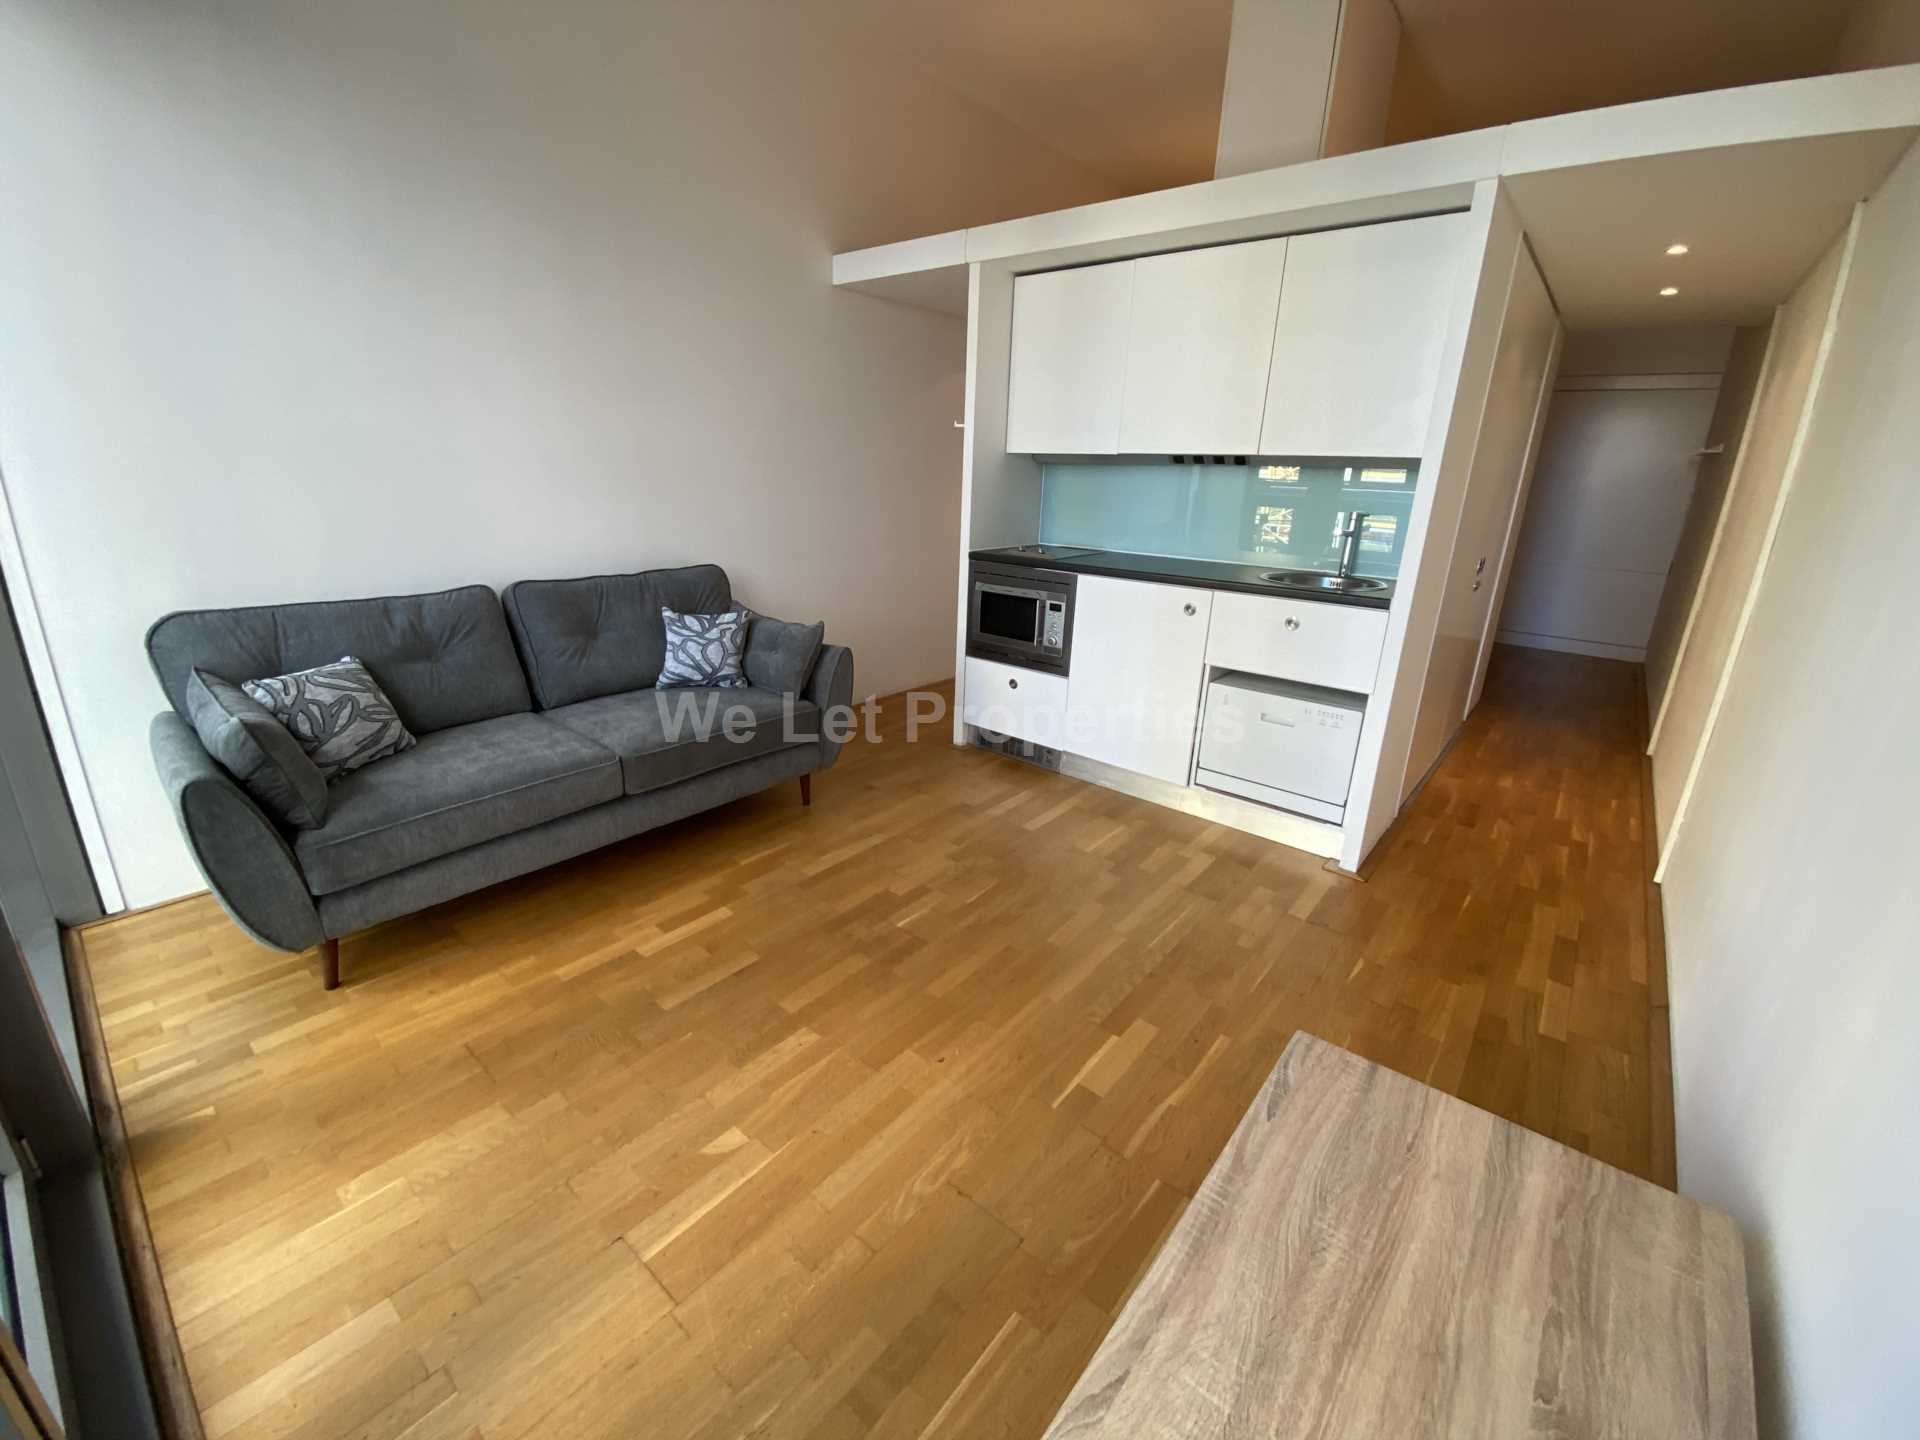 0 bed Apartment for rent in Manchester. From We Let Properties - Manchester